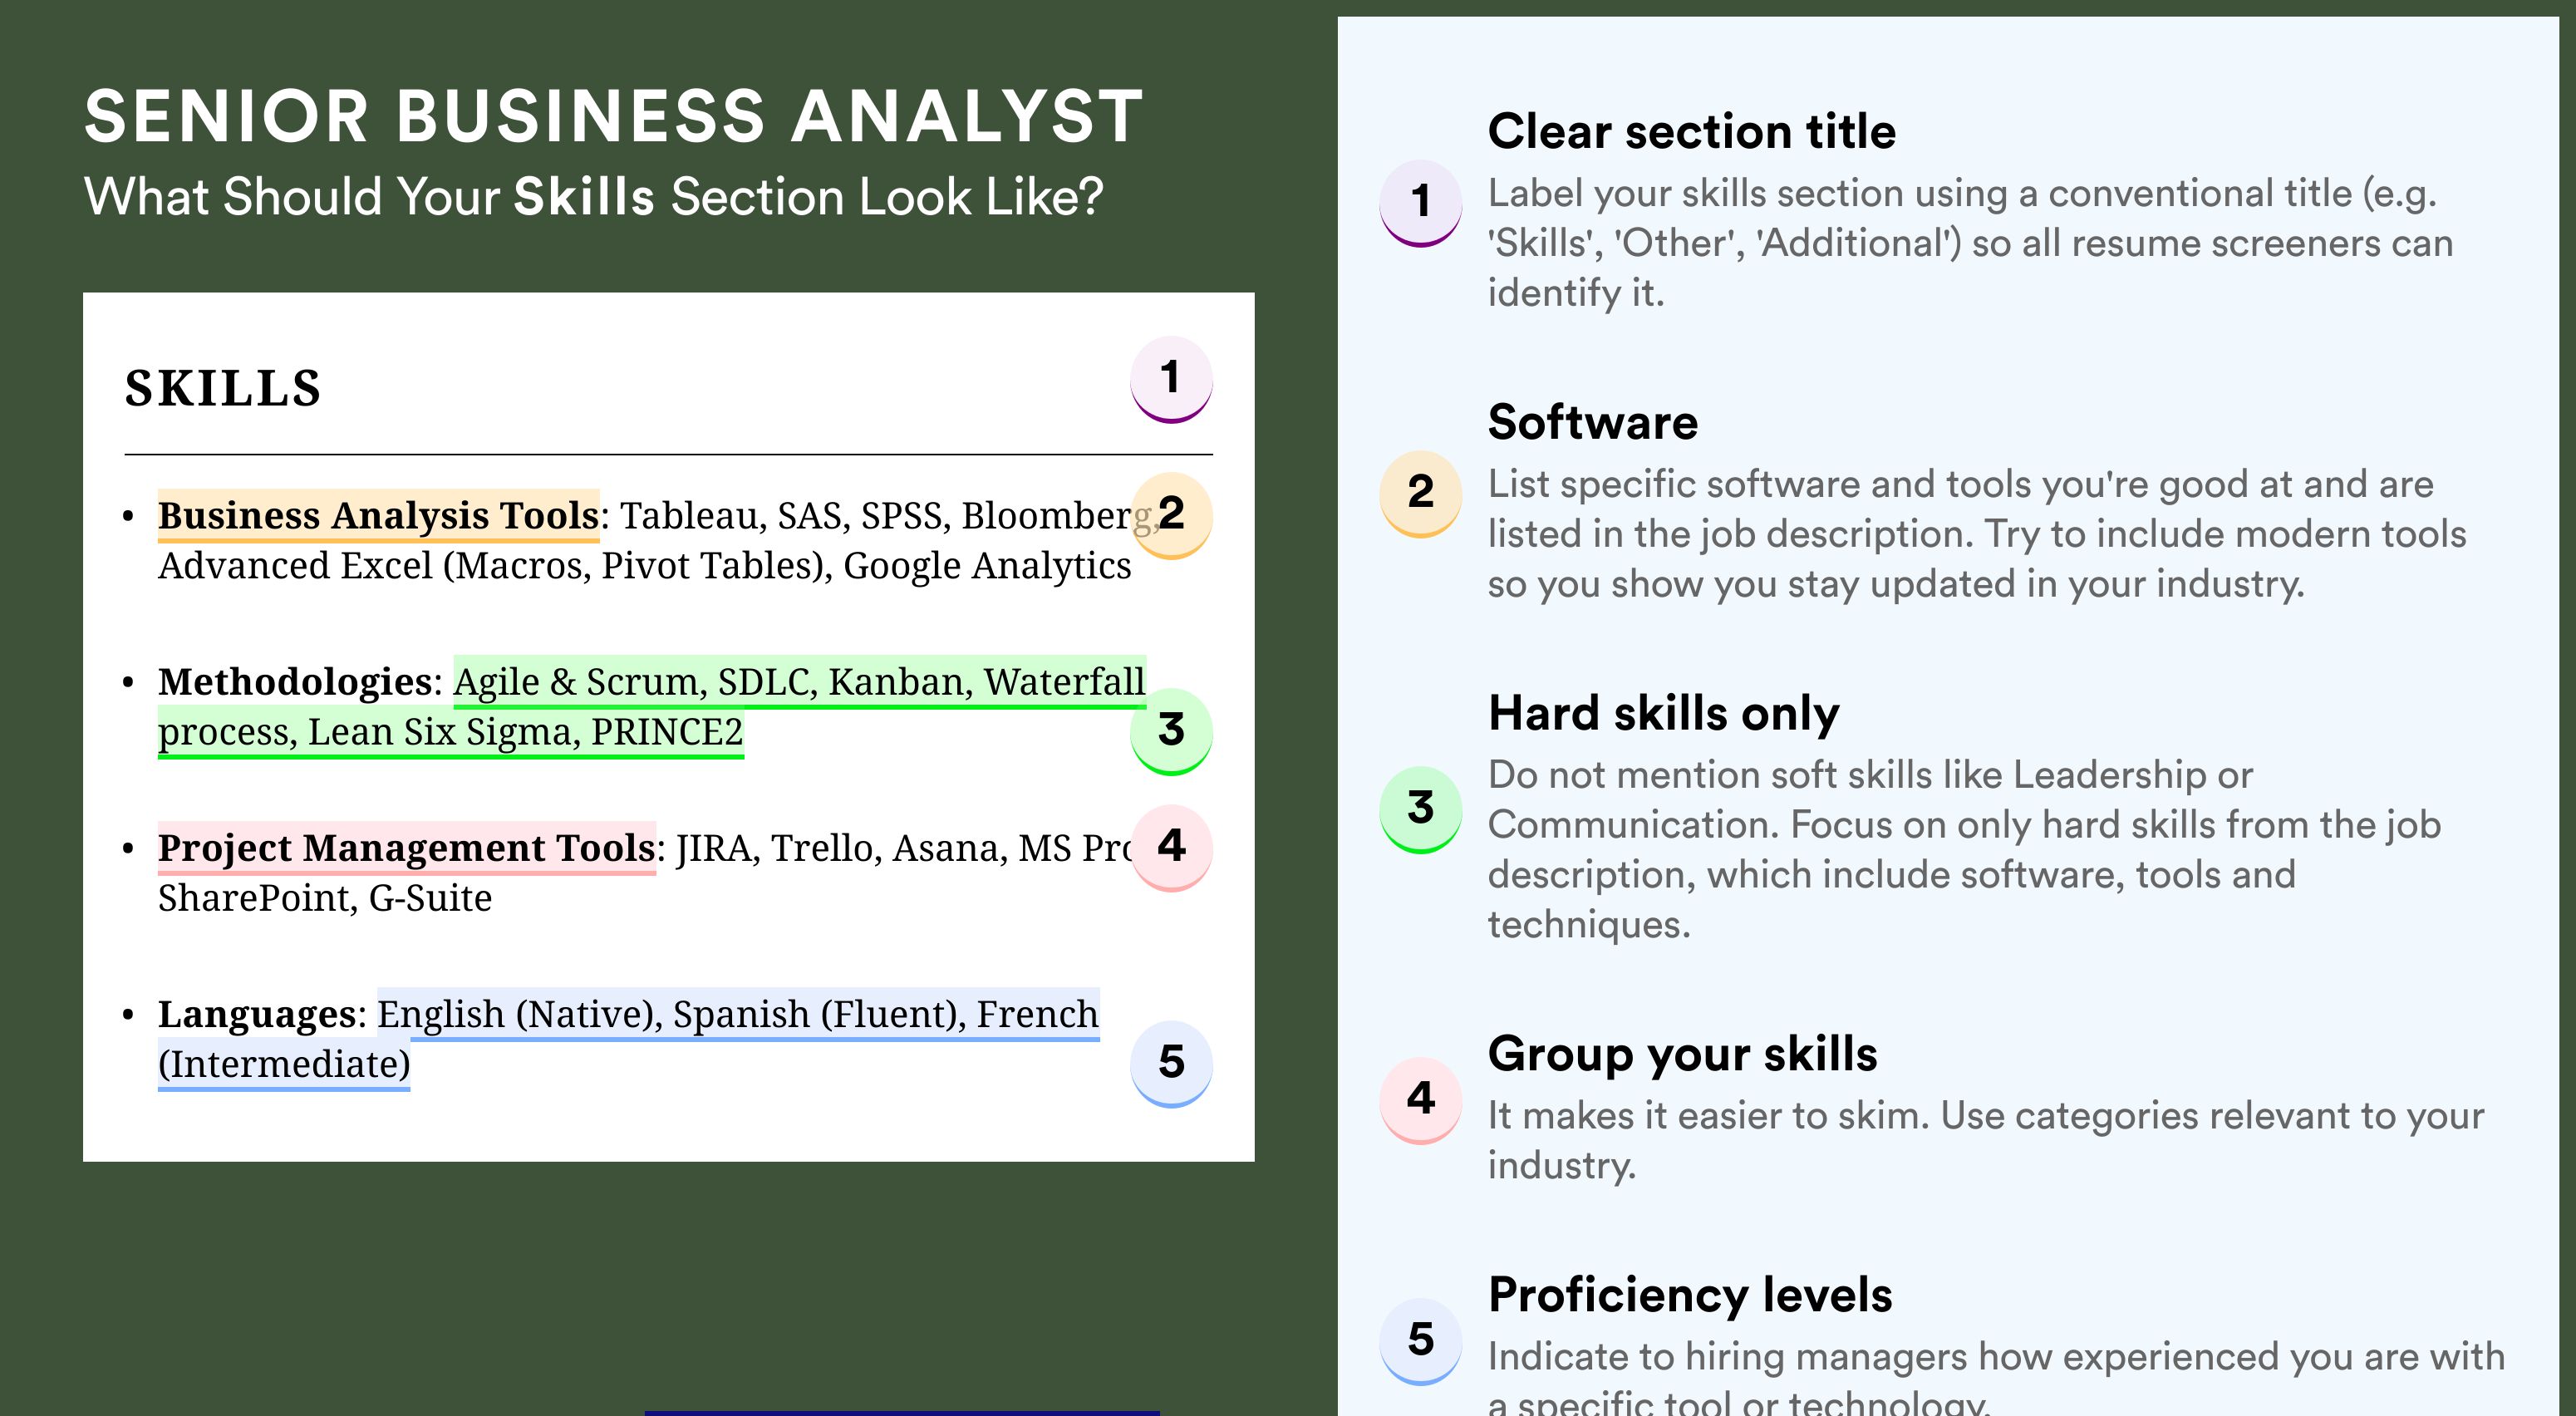 How To Write Your Skills Section - Senior Business Analyst Roles